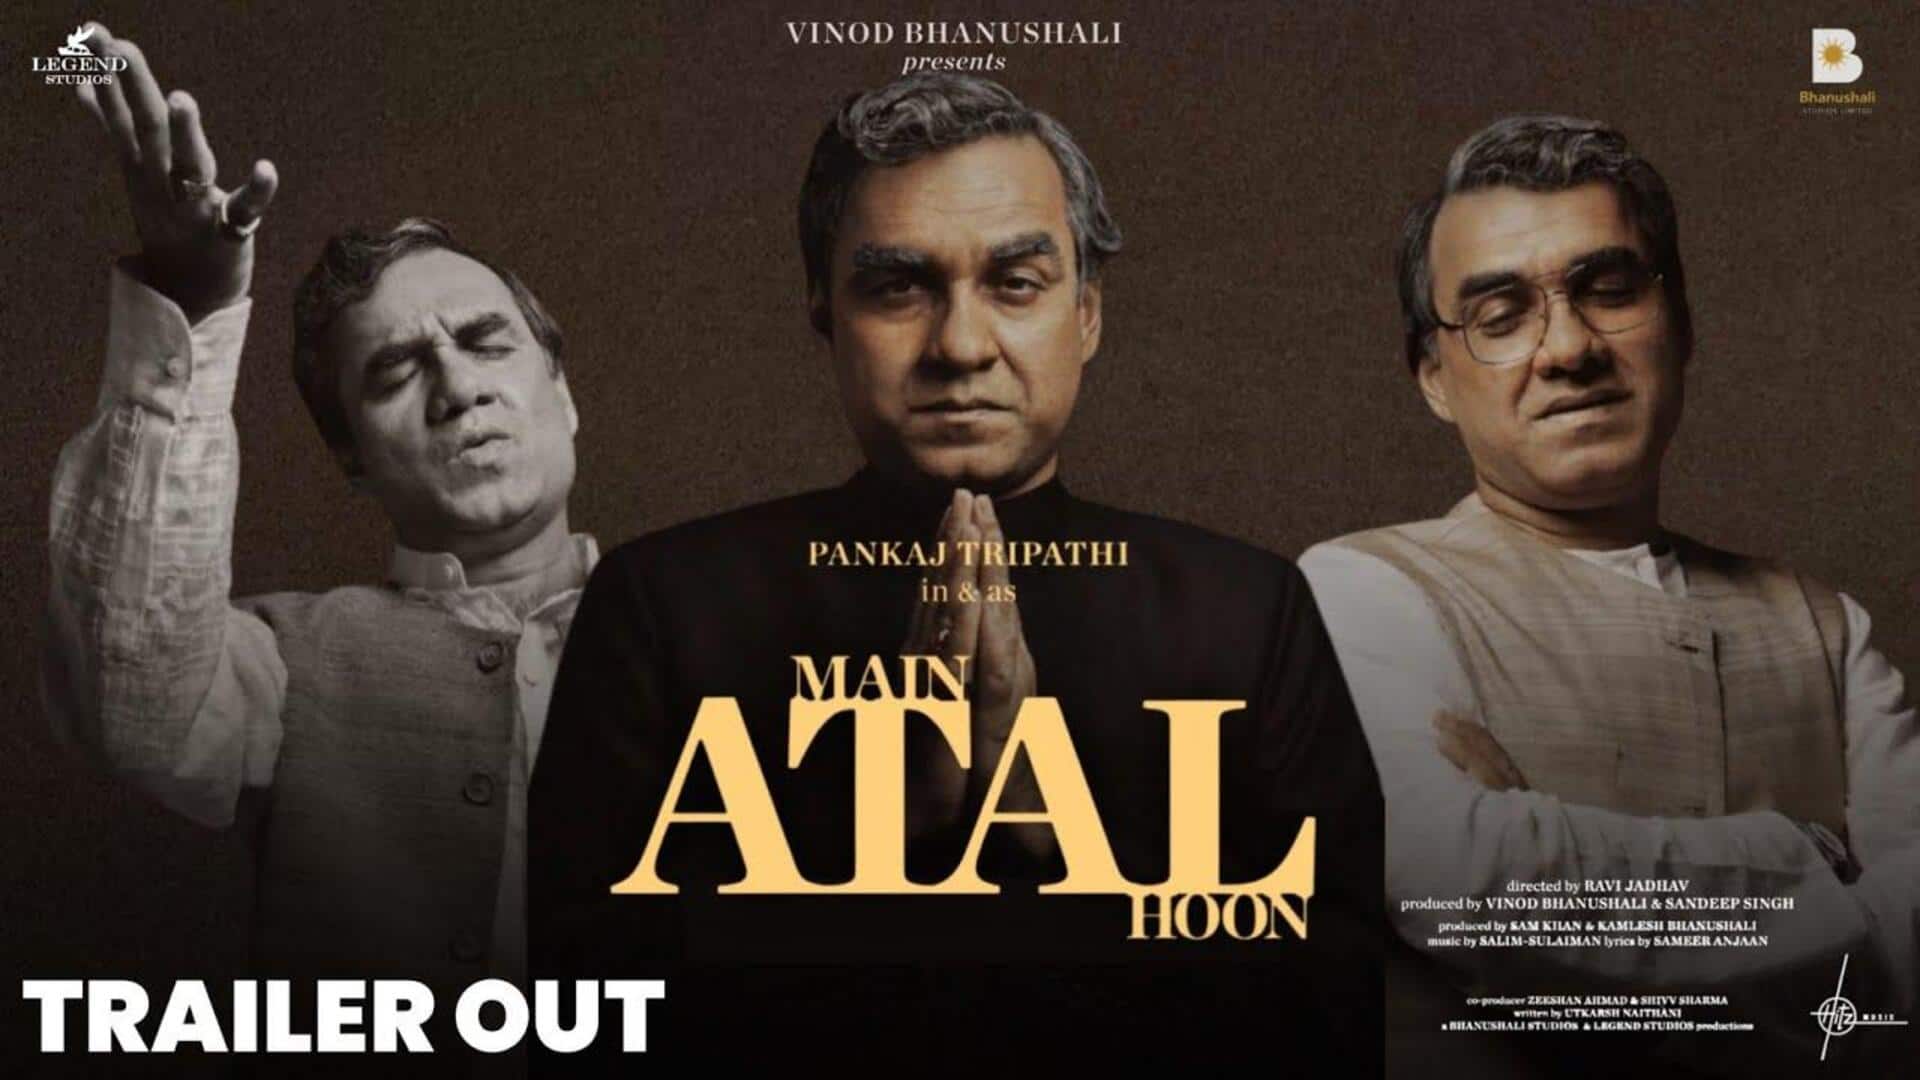 Box office collection: 'Main Atal Hoon' crashes amid 'Fighter' craze